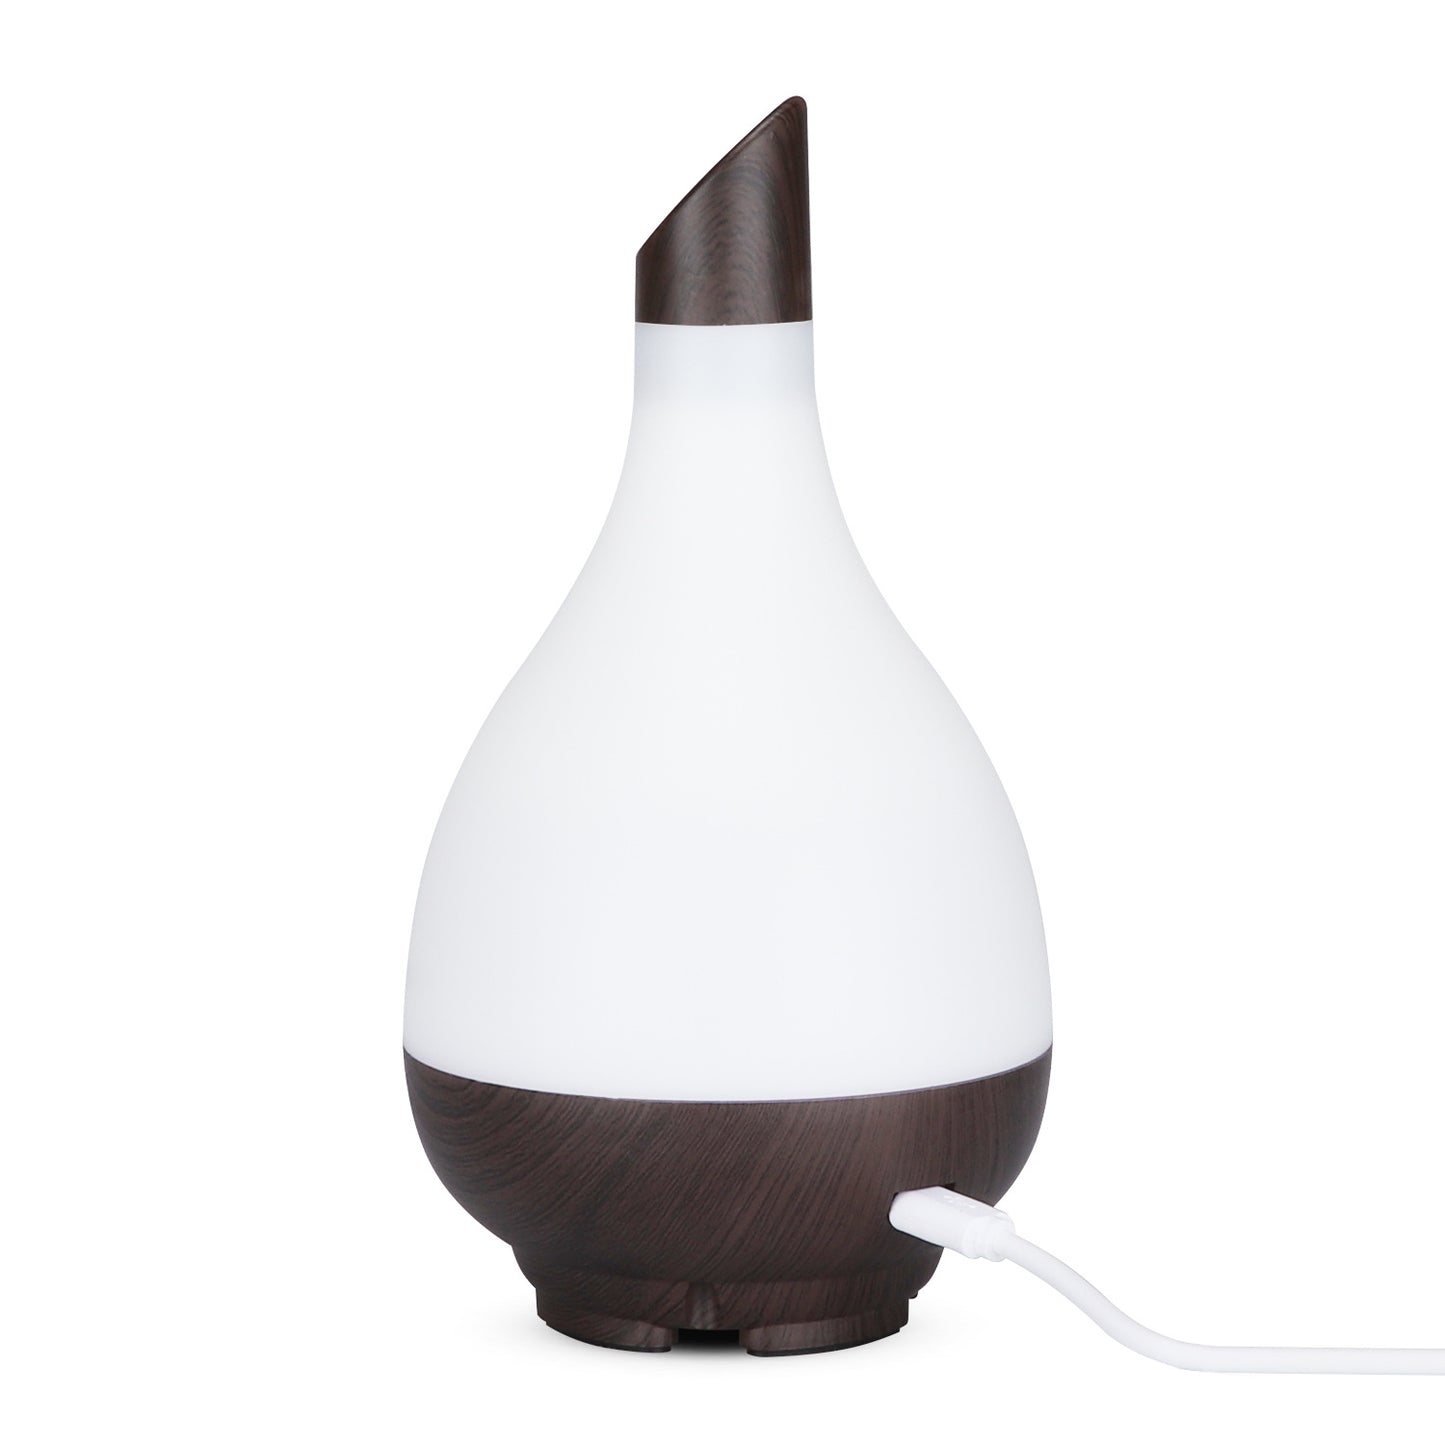 The Simple Aroma Diffuser